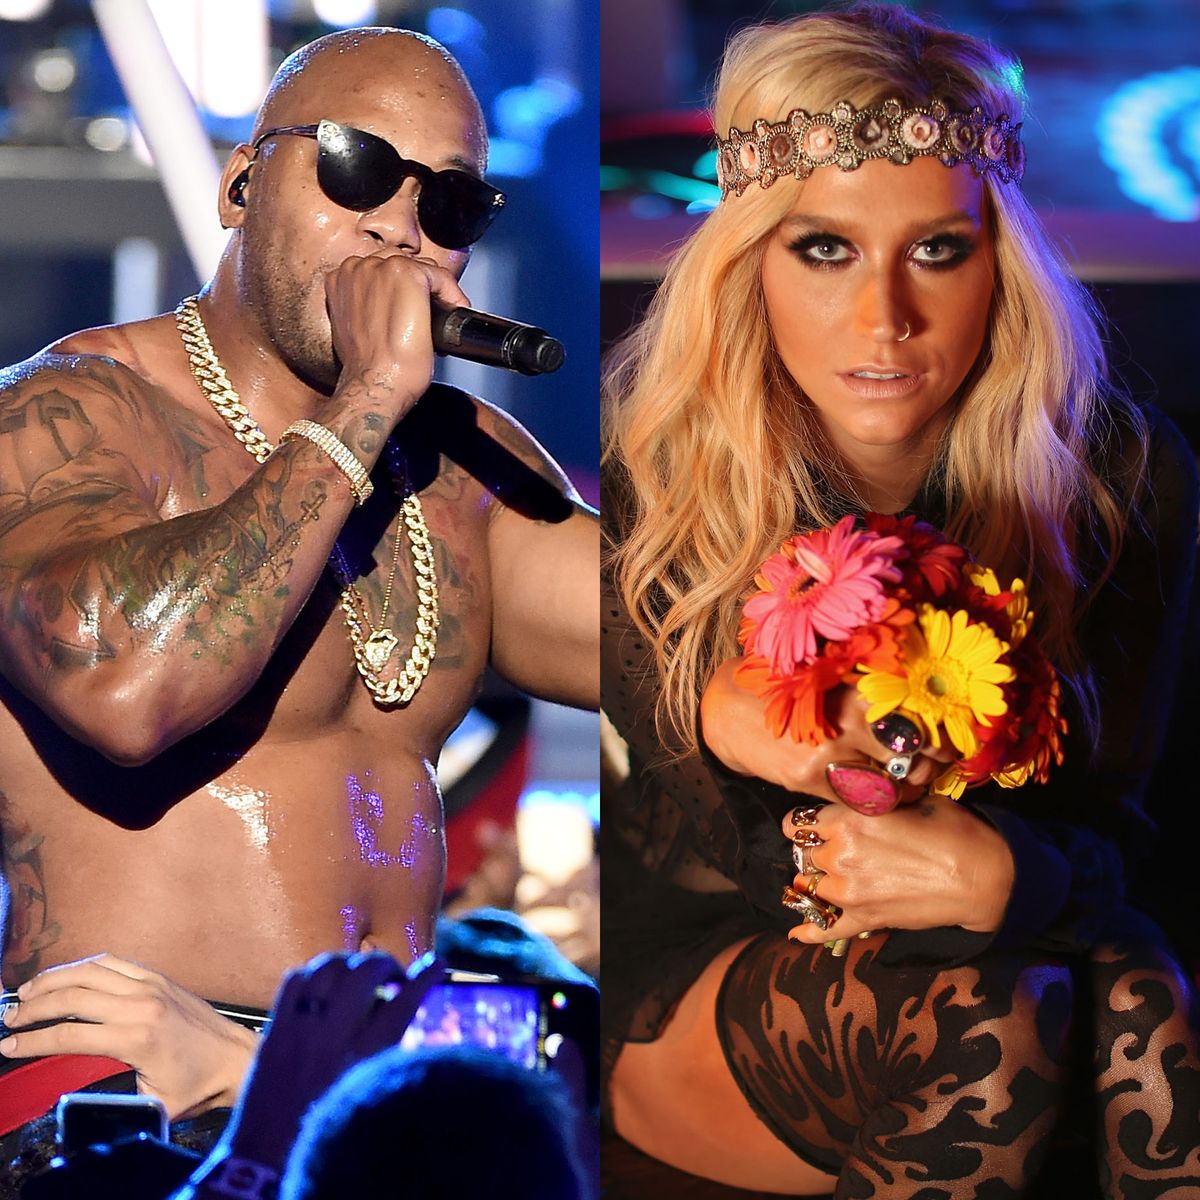 Flo Rida hasn't managed to reach out to Kesha during her legal battle with  Dr Luke